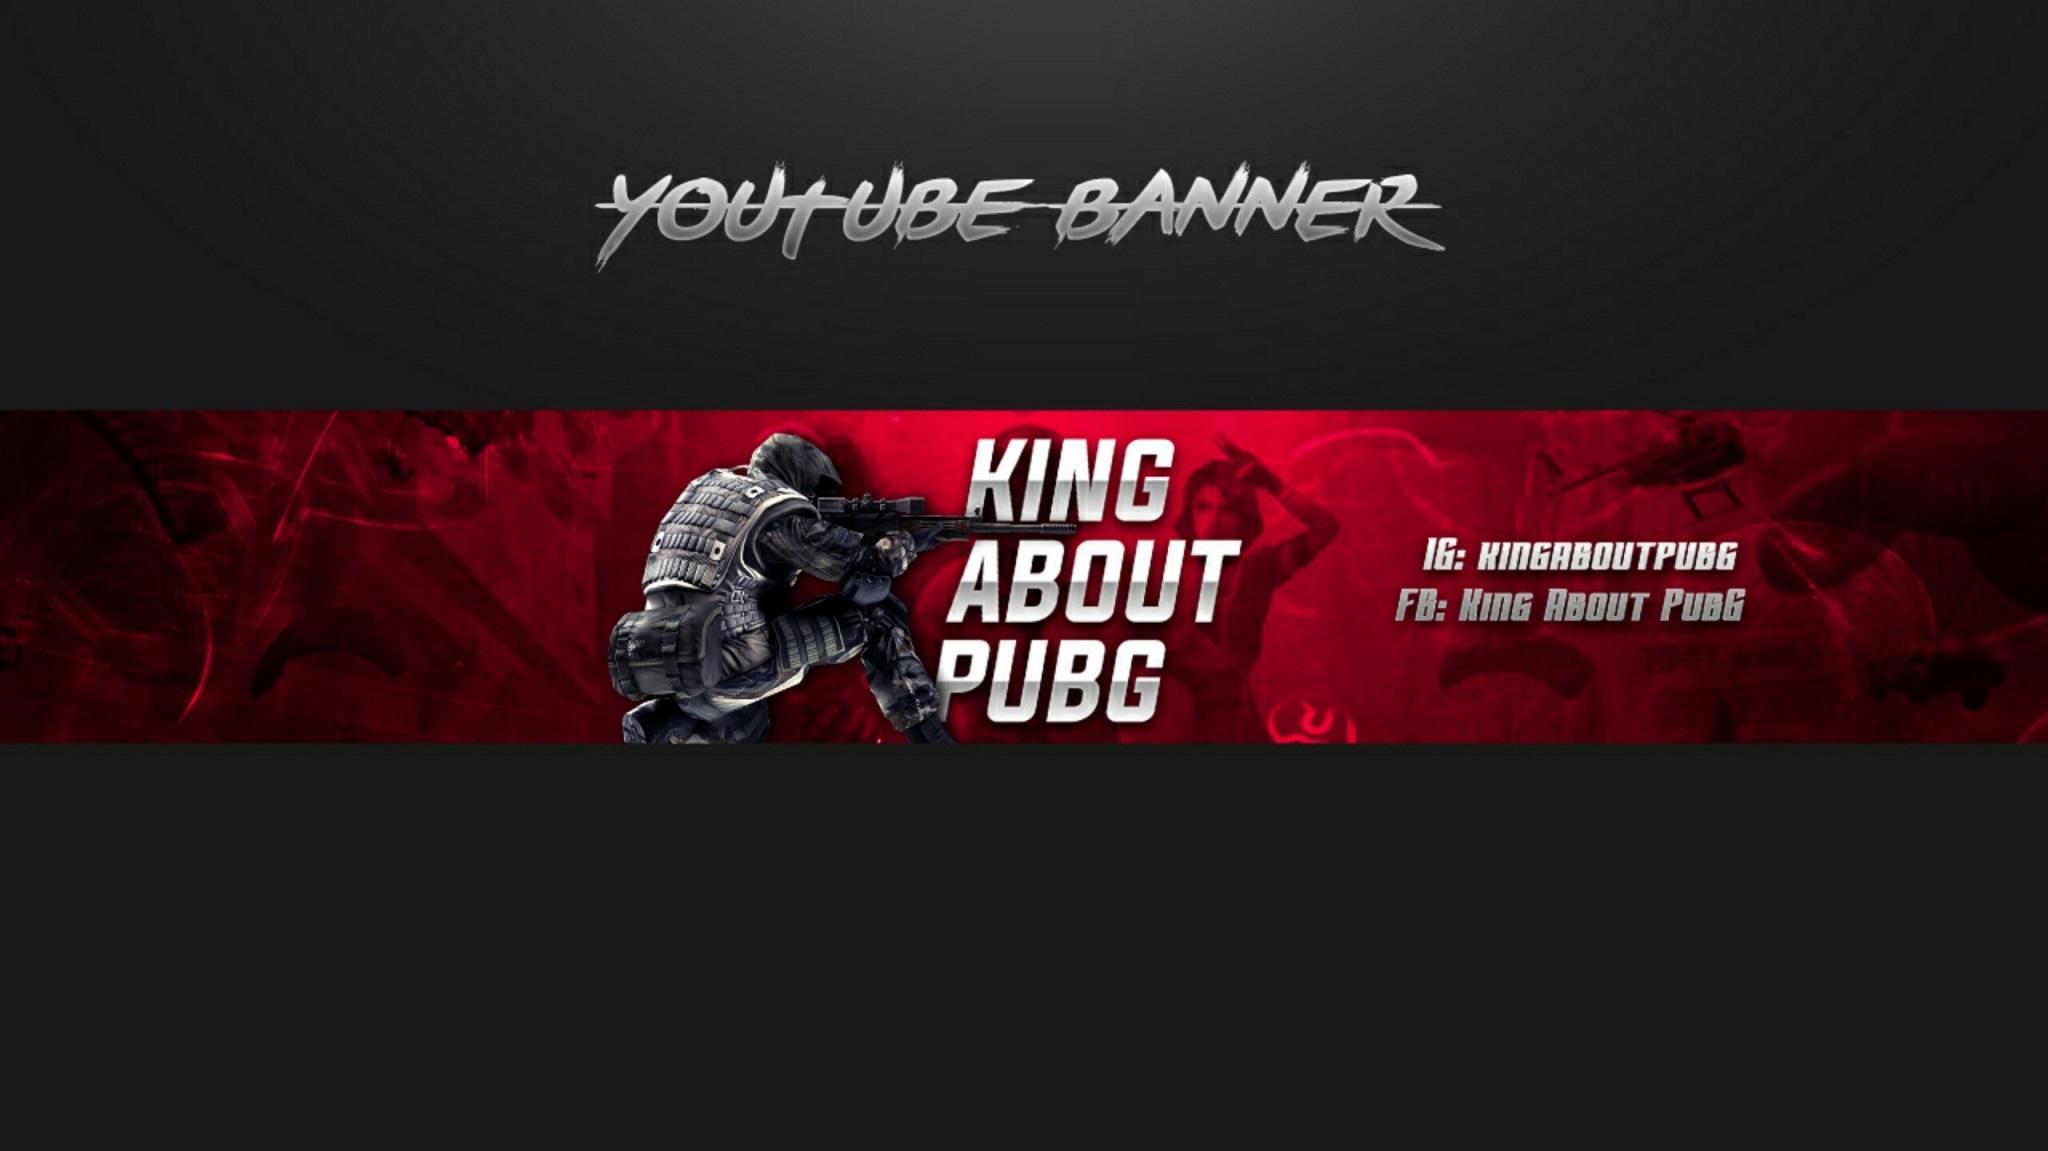 King About Pubg King About Pubg updated their cover photo